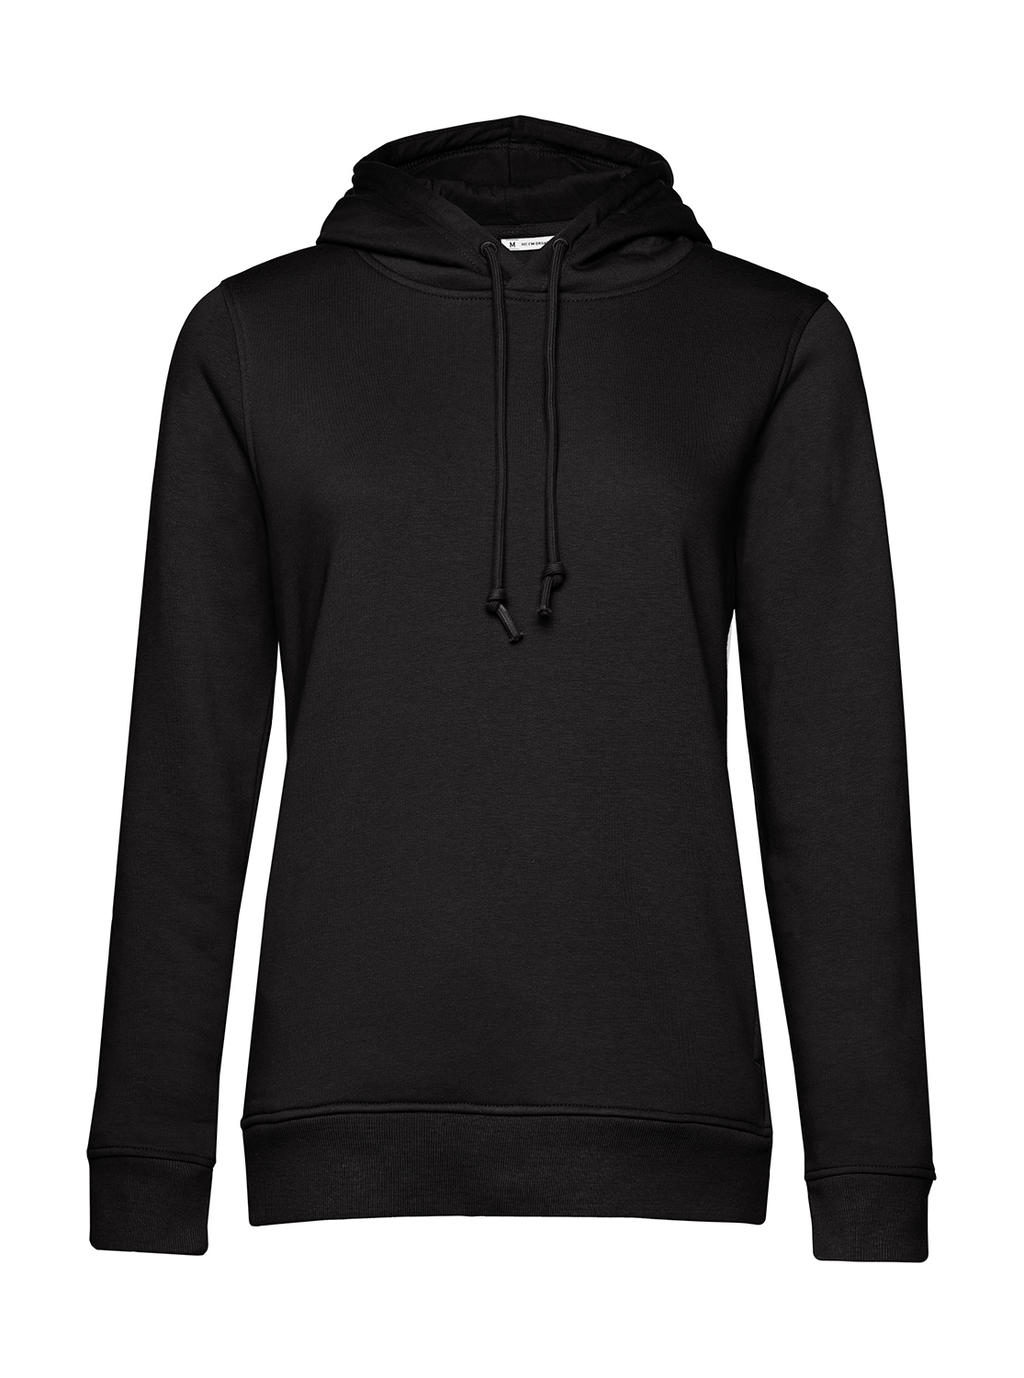  Organic Inspire Hooded /women_? in Farbe Black Pure